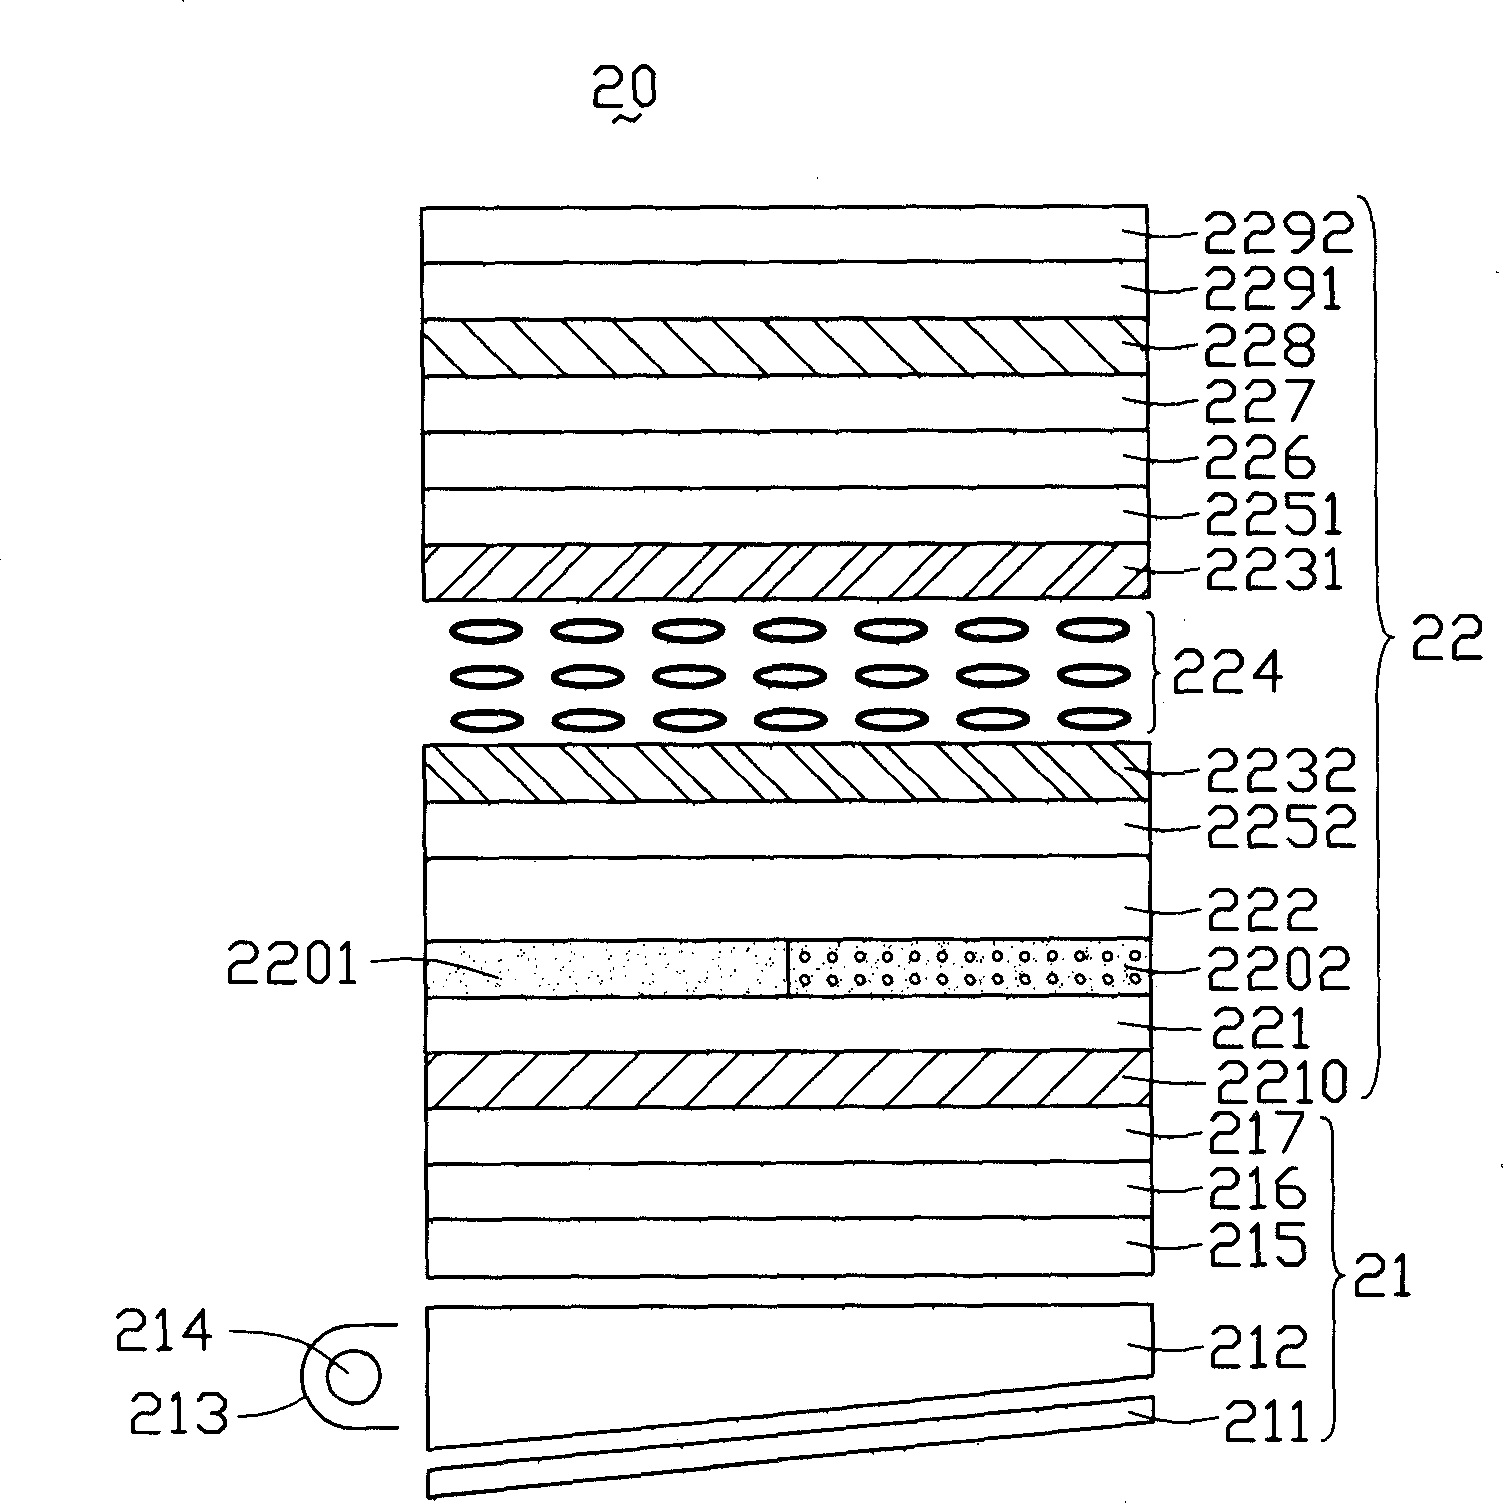 Display faceplate and LCD device